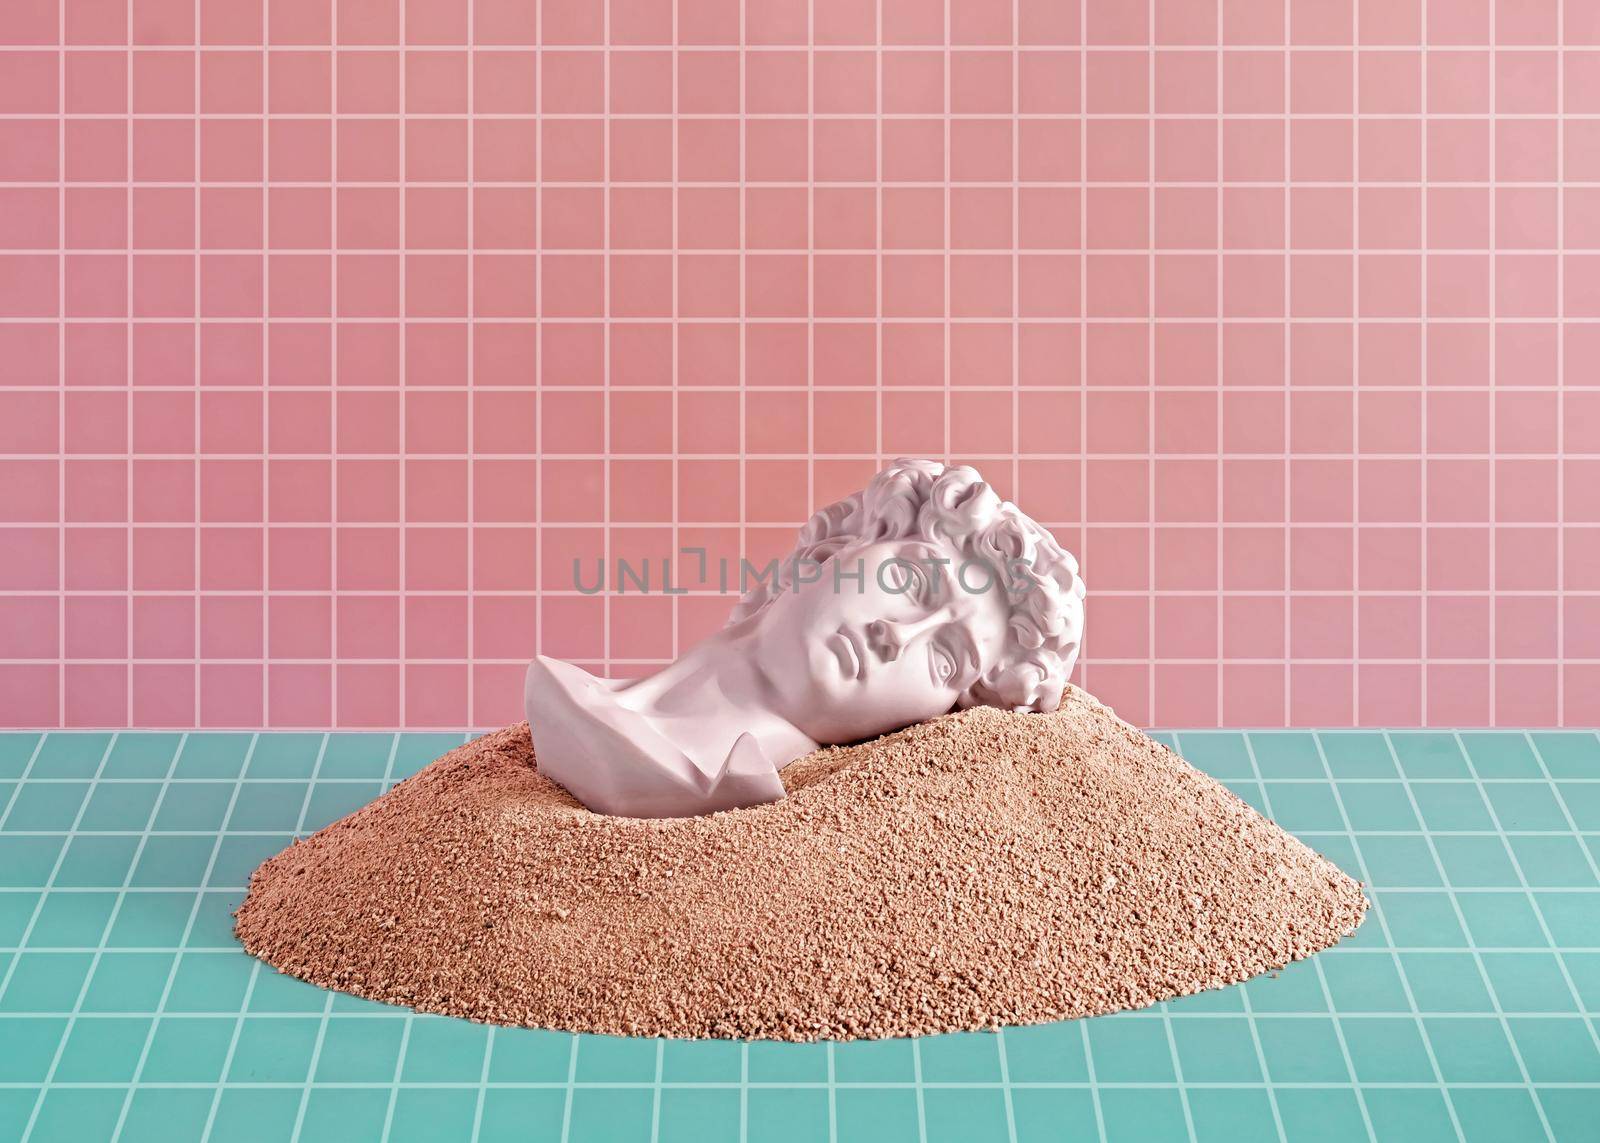 Sculpture of Michelangelo's David's head lies and dreams in the sand and futuristic digital background NFT and vaporwave. Minimal pastel concept of archeology and metaverse and cyberpunk pop.